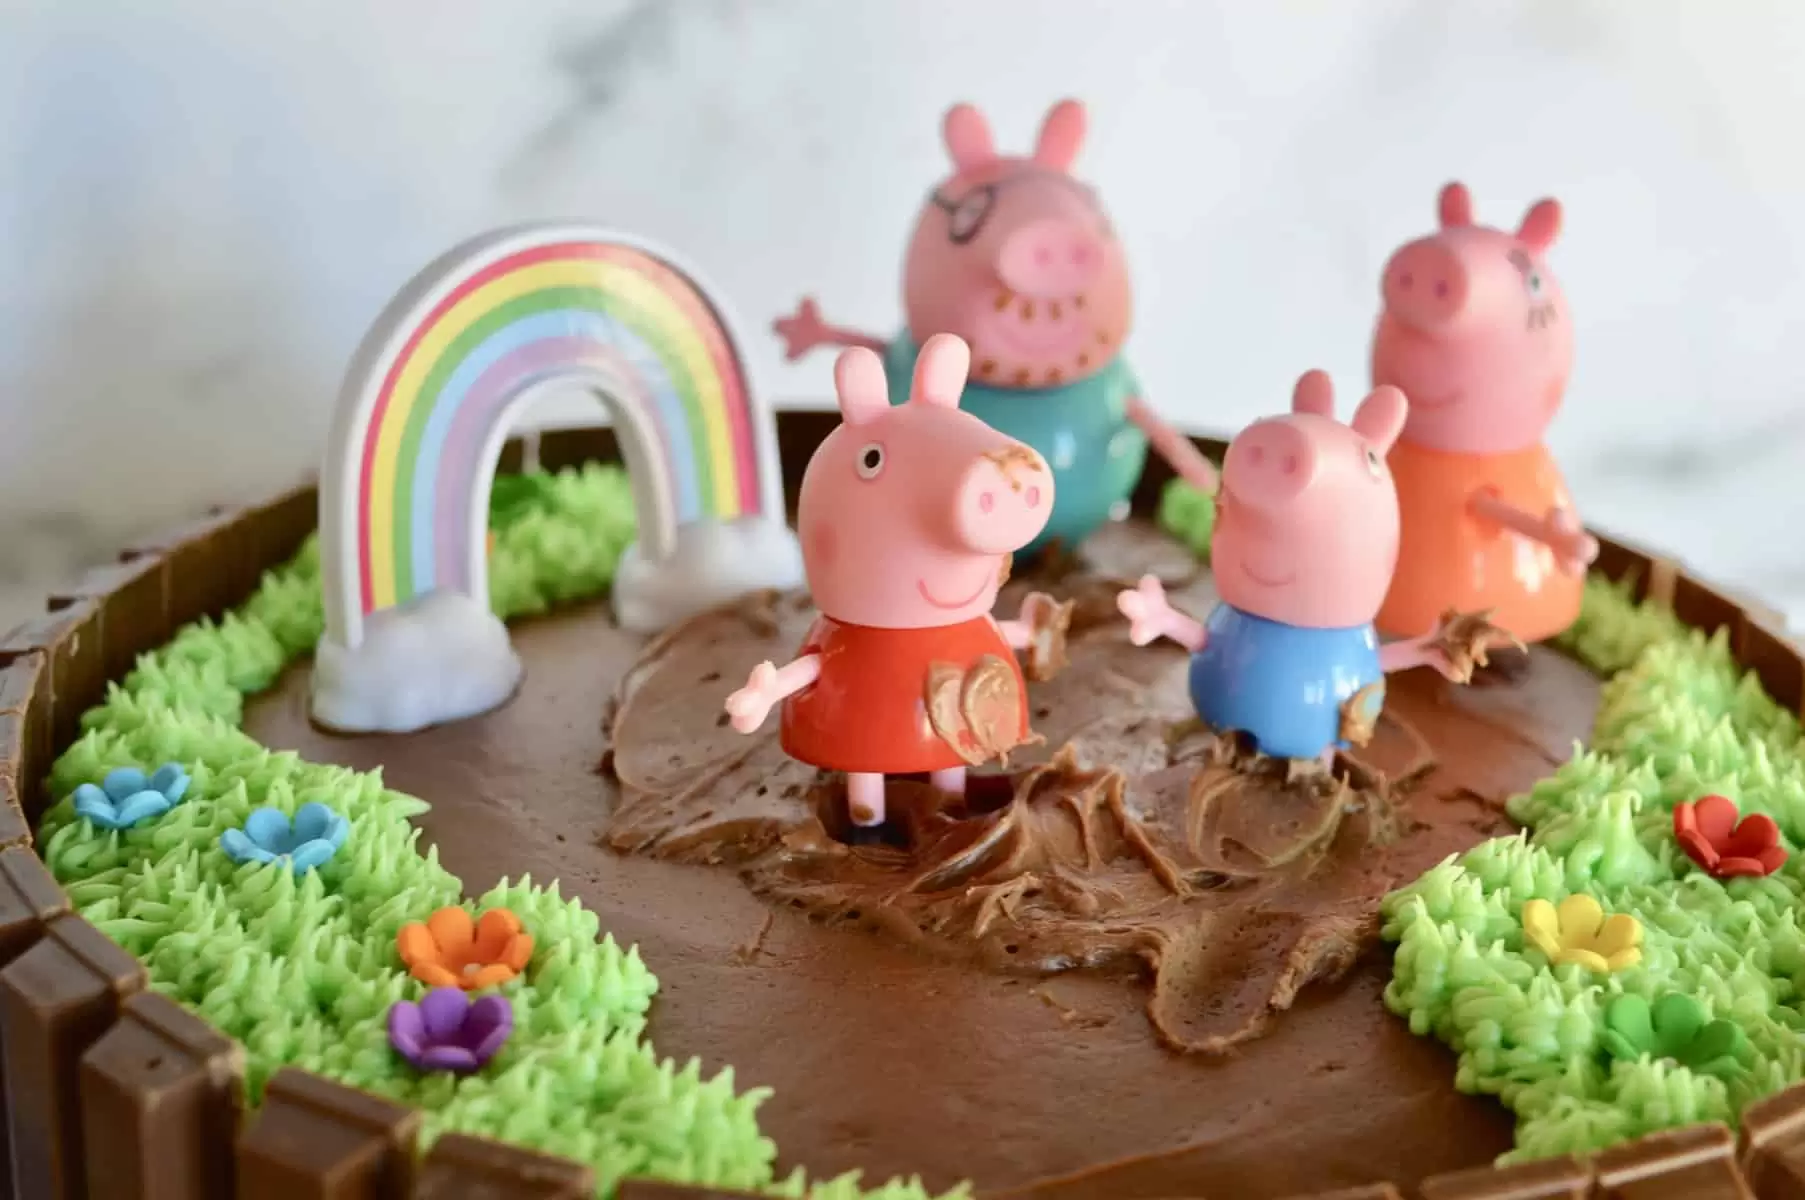 use chocolate frosting to add mud to peppa and George's hands 